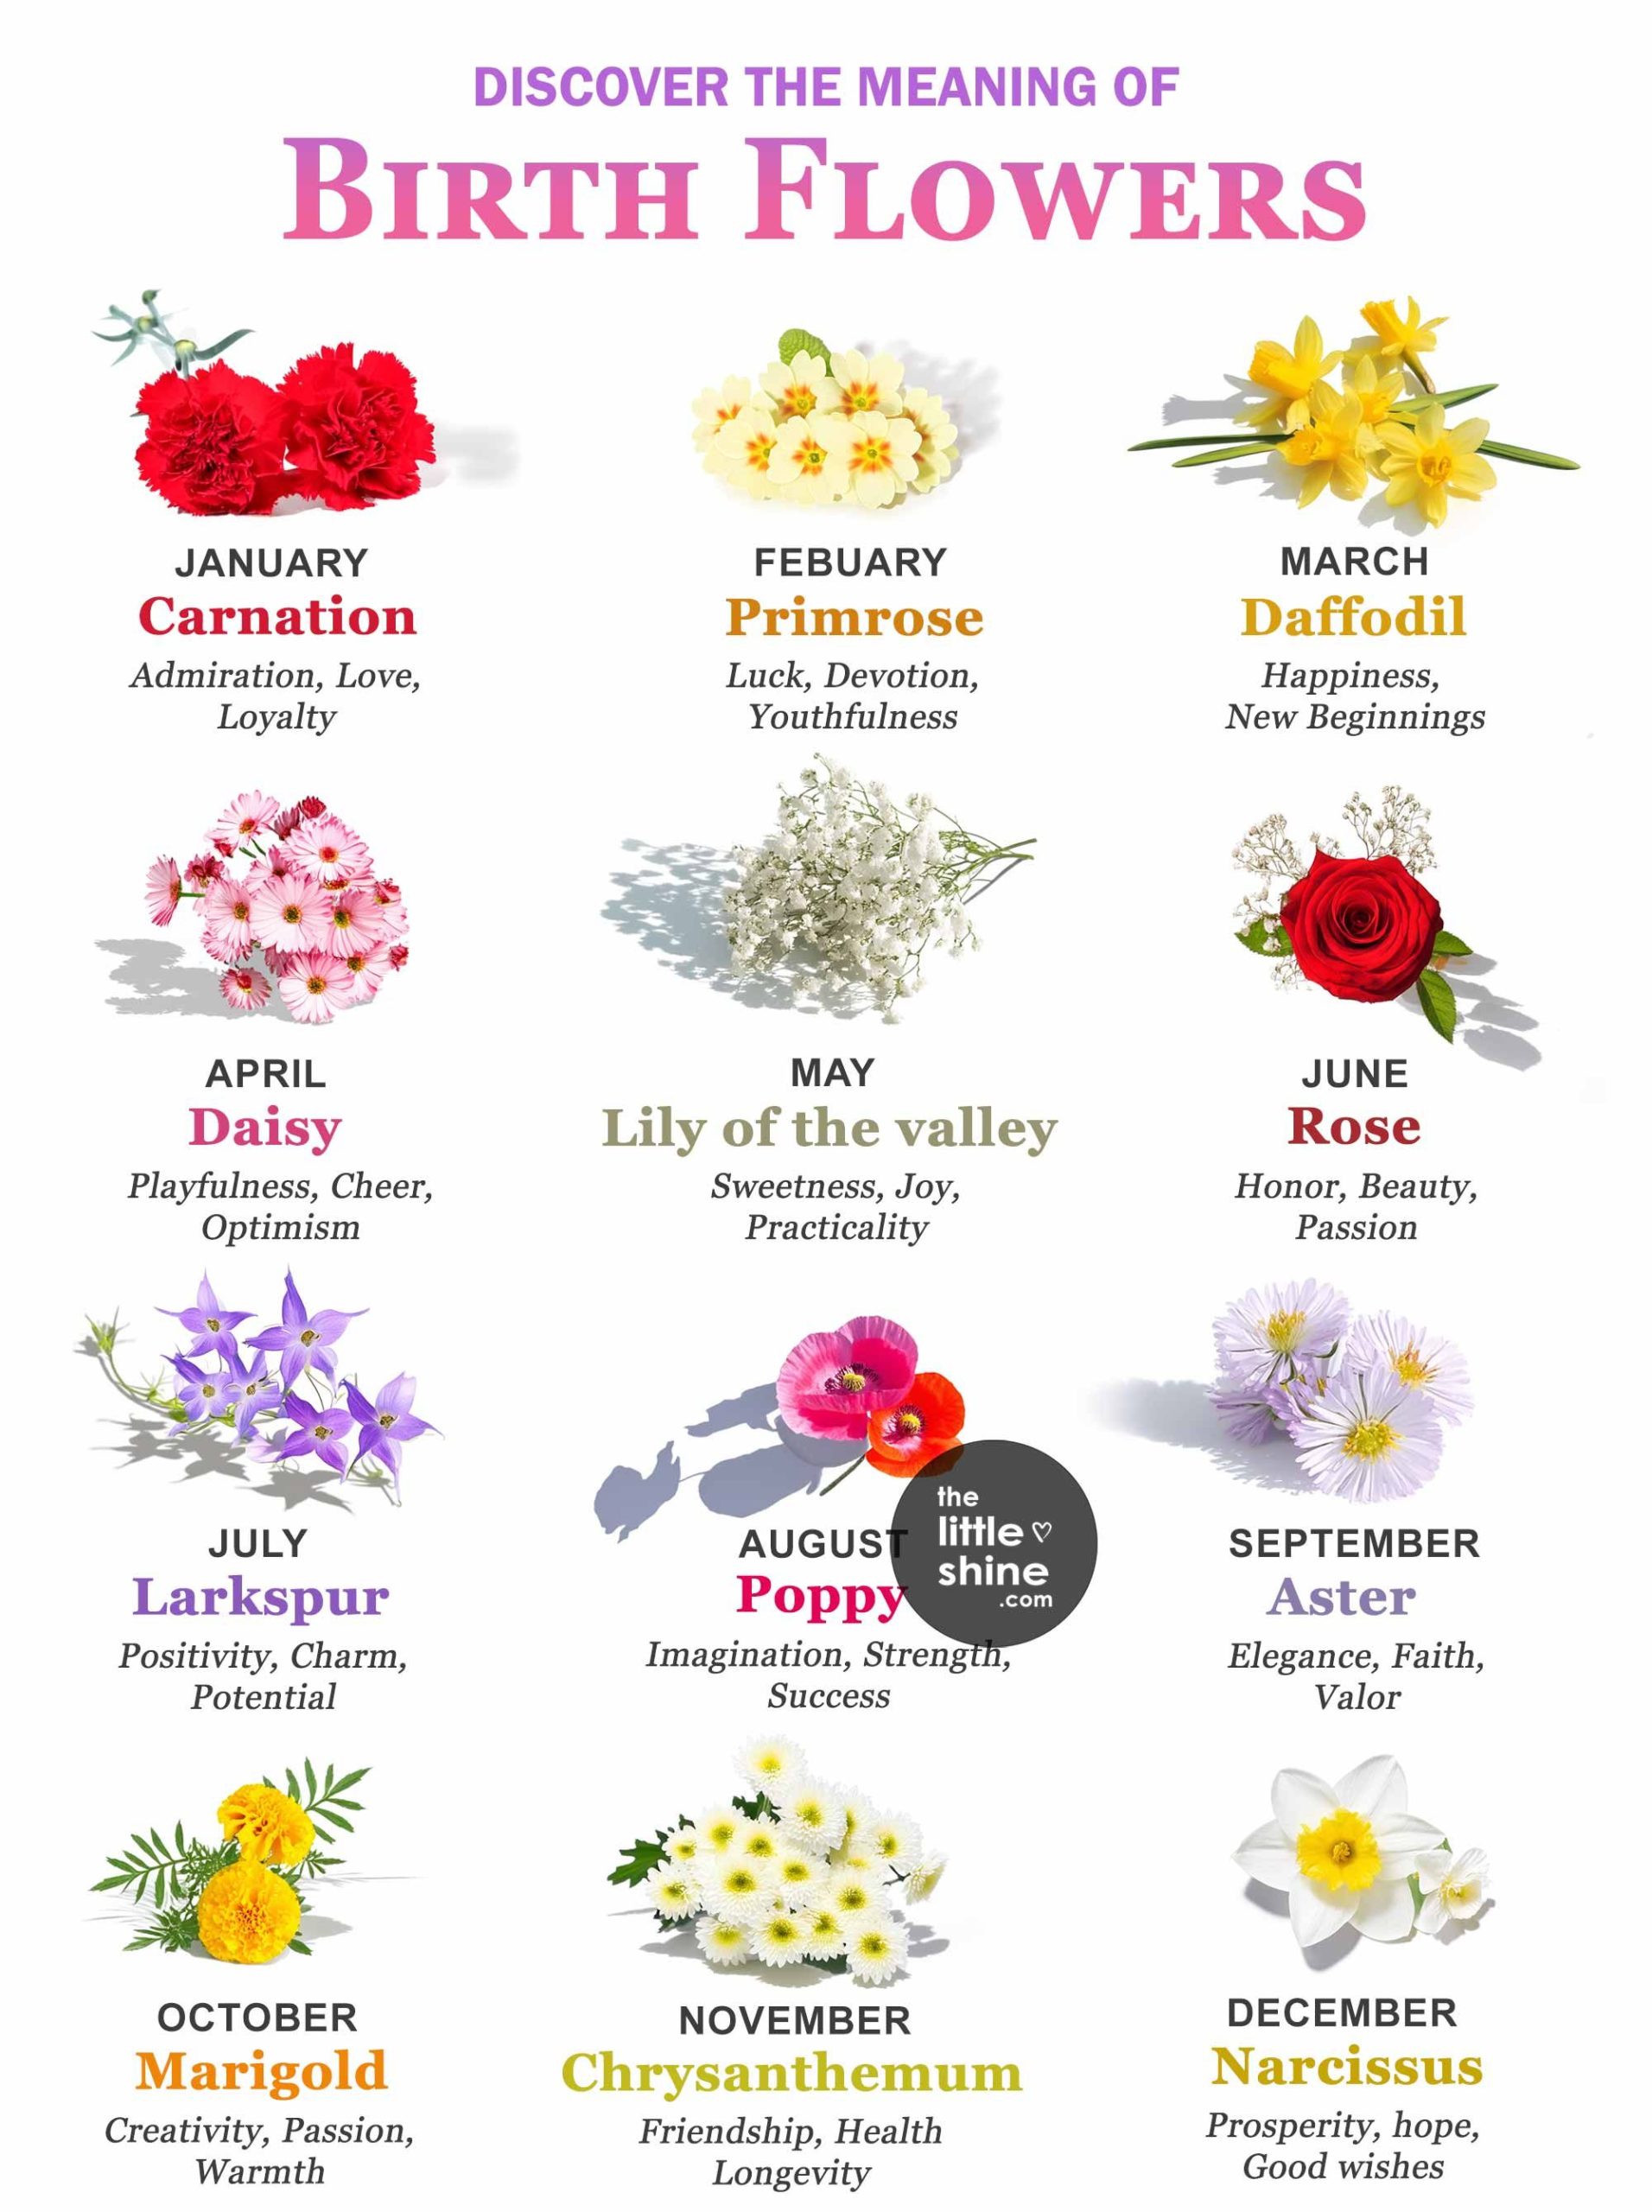 Birth Flowers by Month and Their Meanings